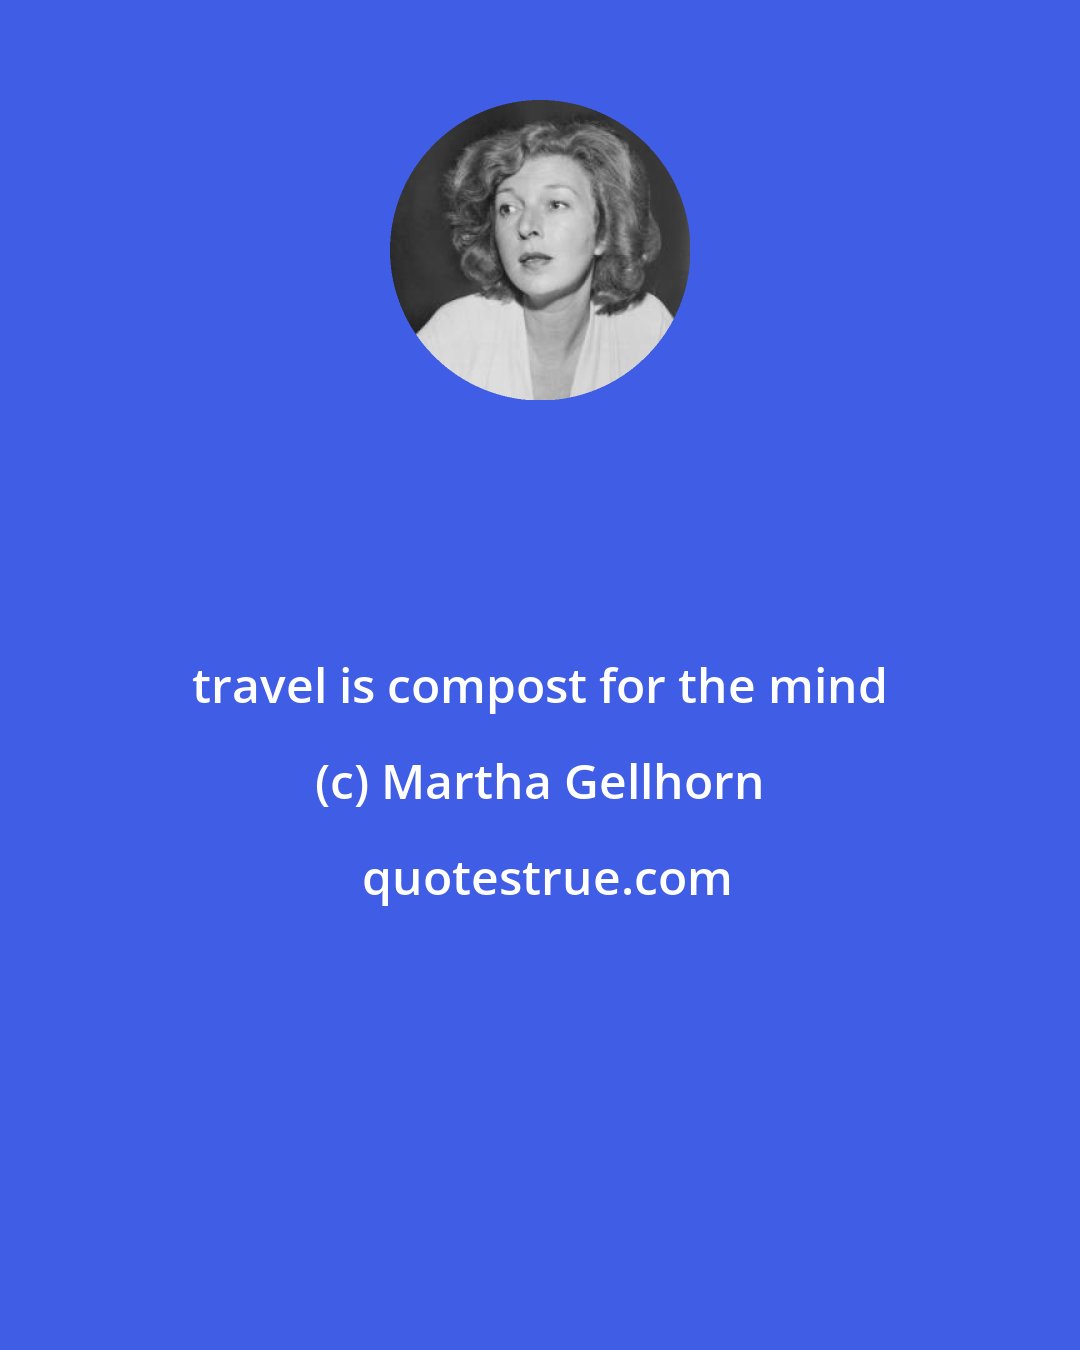 Martha Gellhorn: travel is compost for the mind